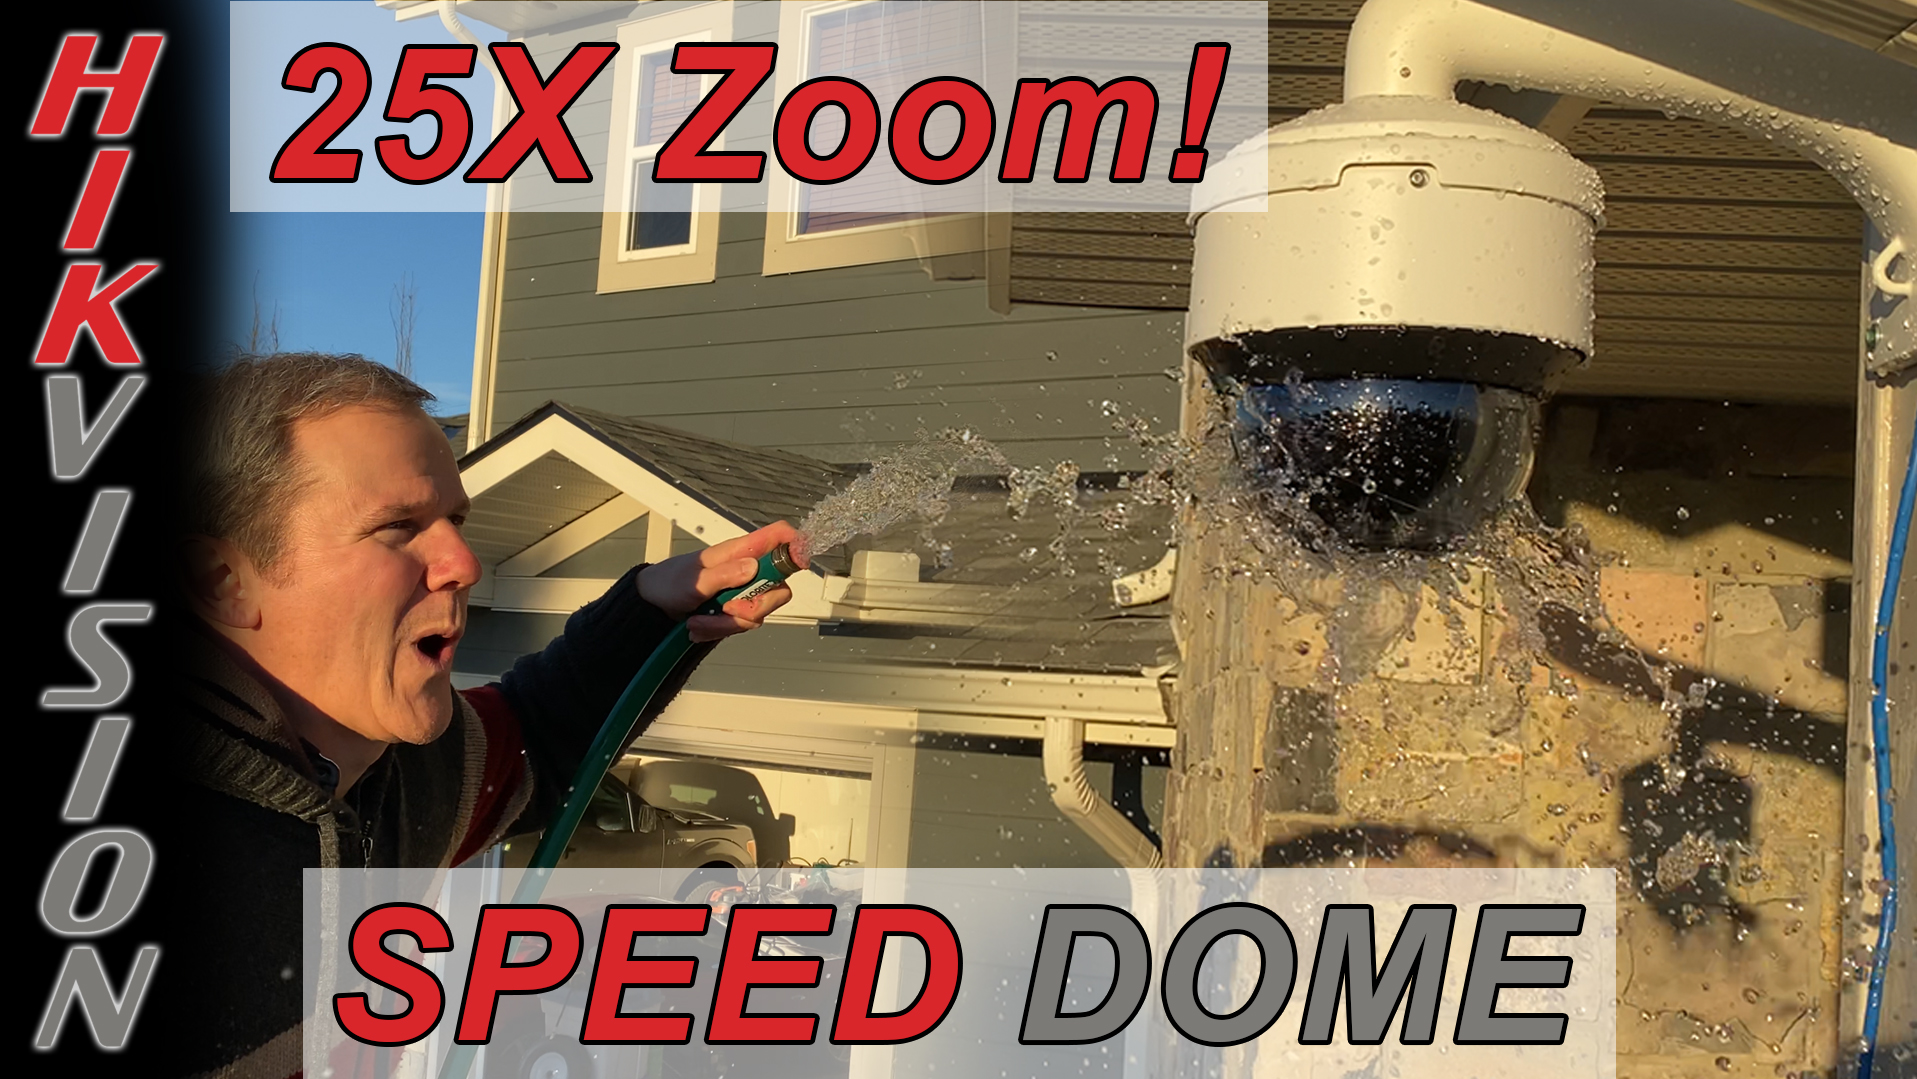 hikvision speed dome review thumb